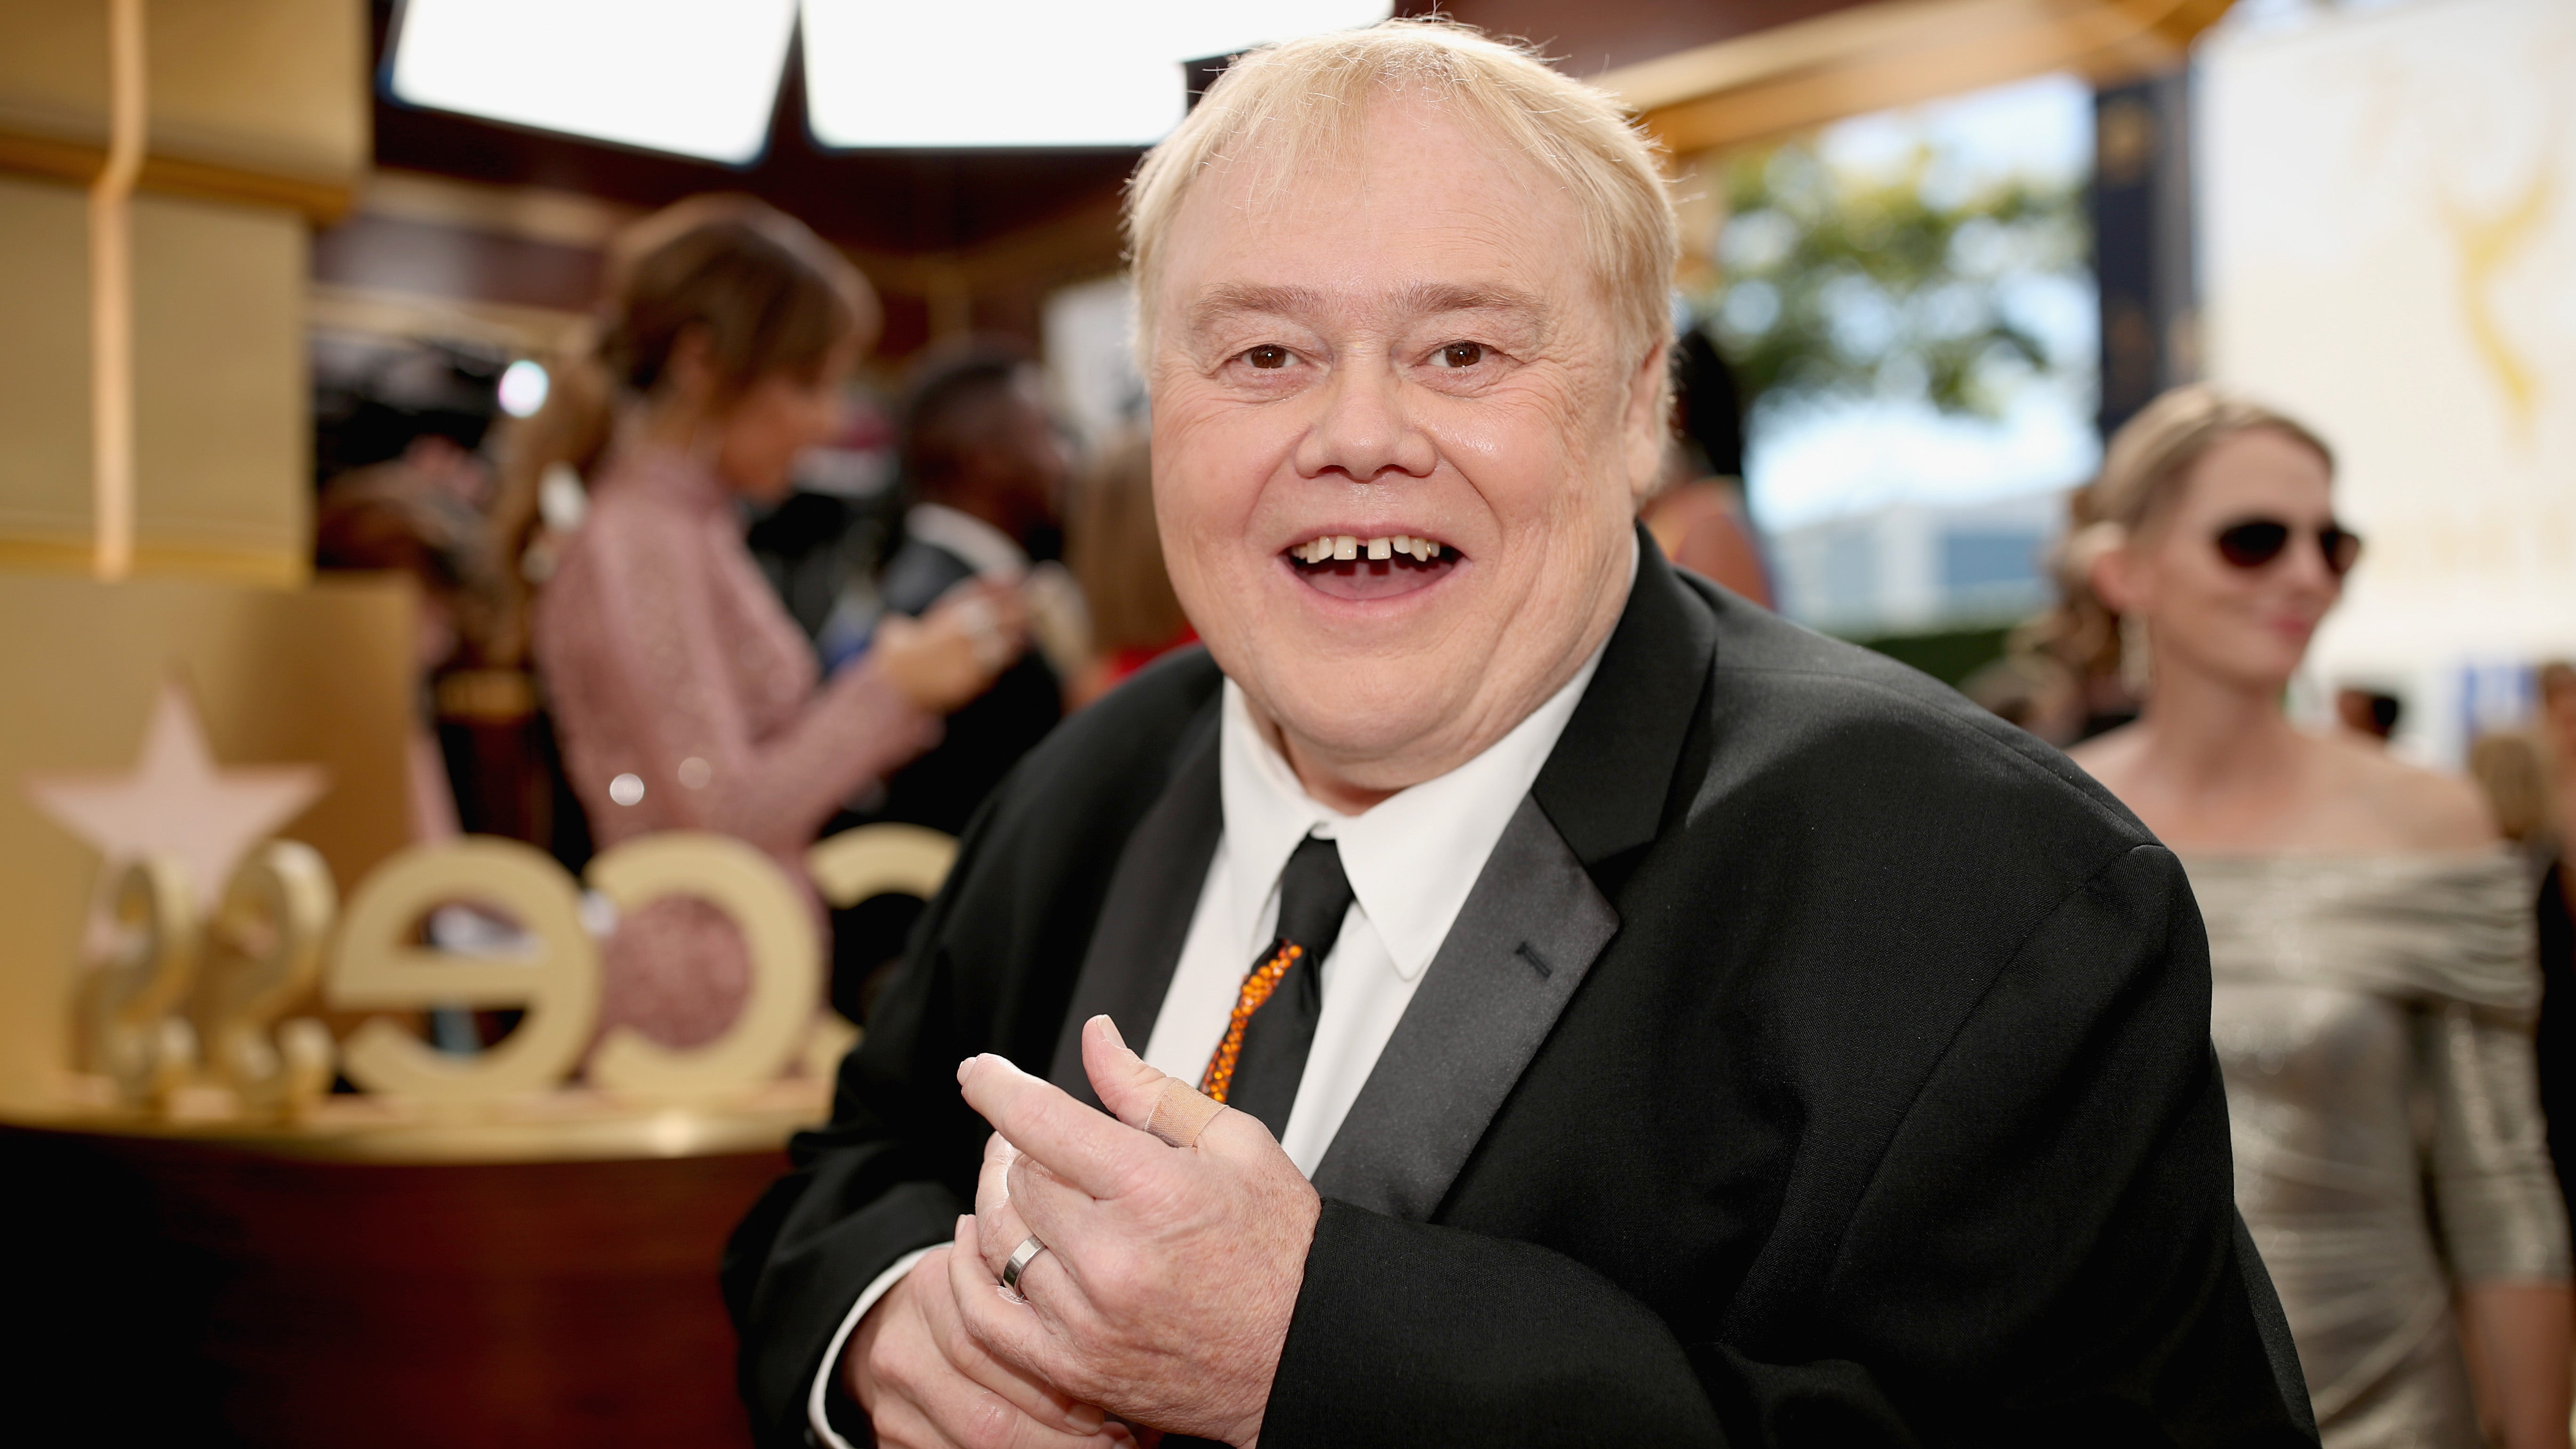 Comic Louie Anderson: Late brother was 'sounding board